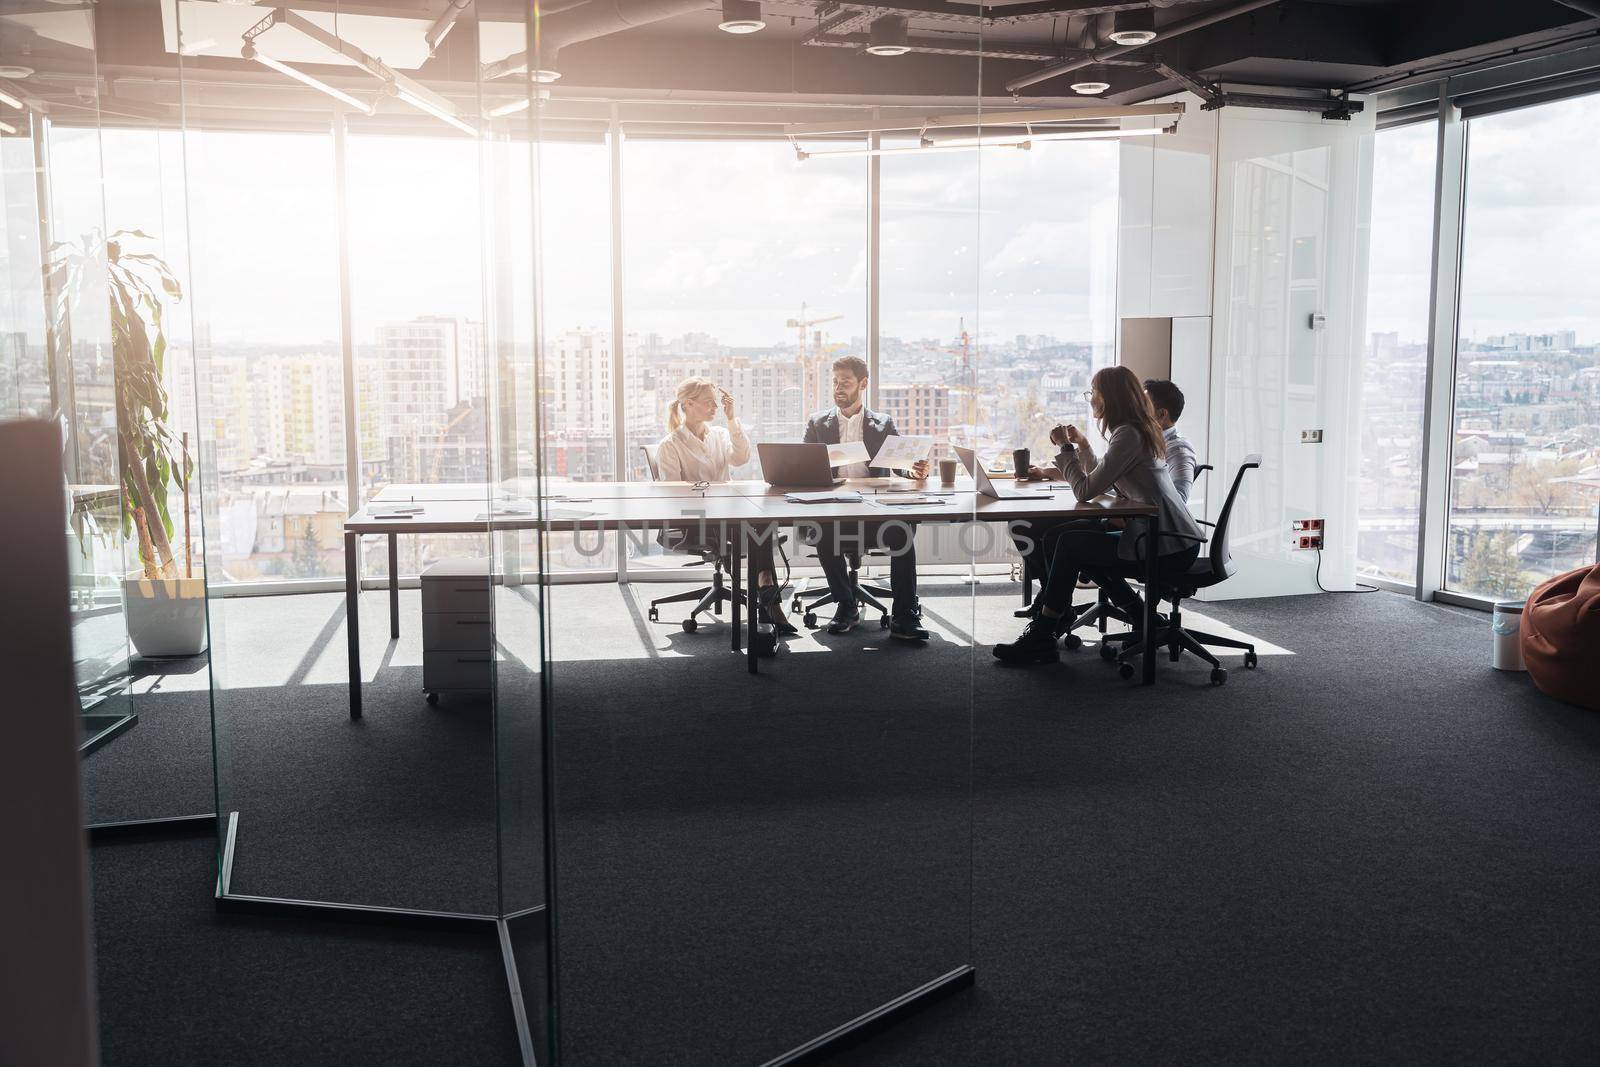 Team of businessmen communicating together in modern office with panoramic windows by Yaroslav_astakhov